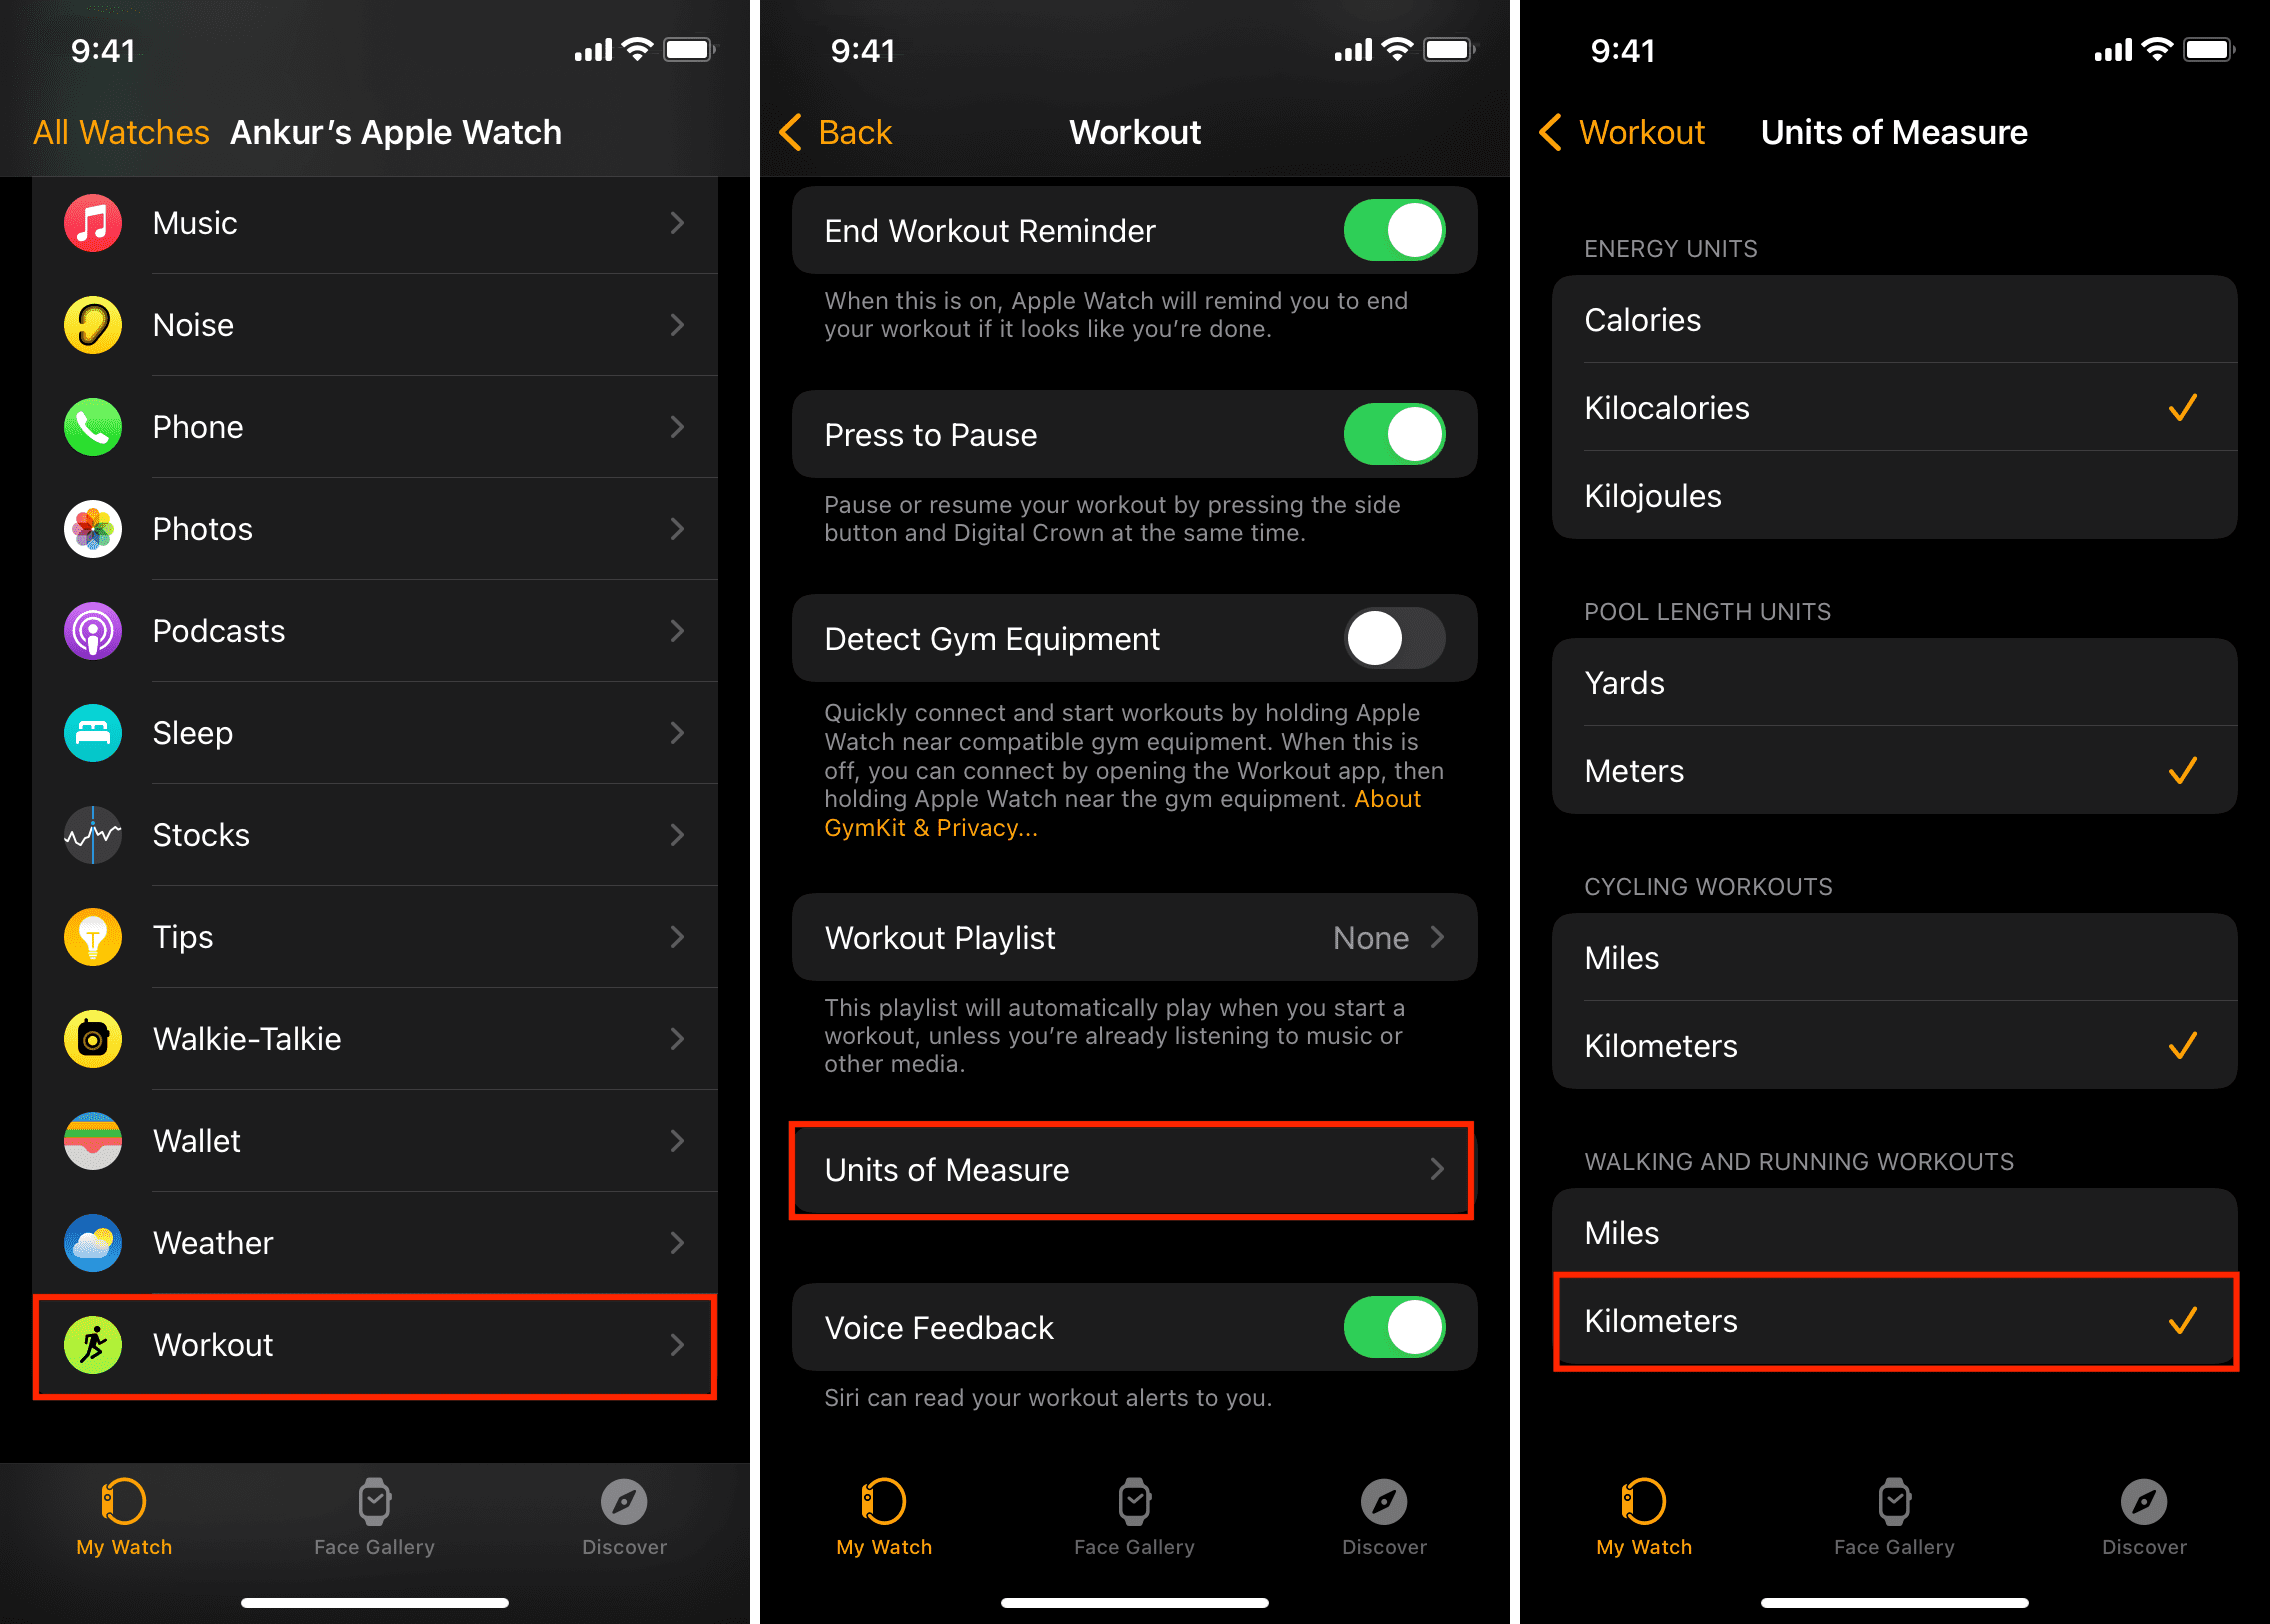 Units of Measure settings in the Watch app on iPhone